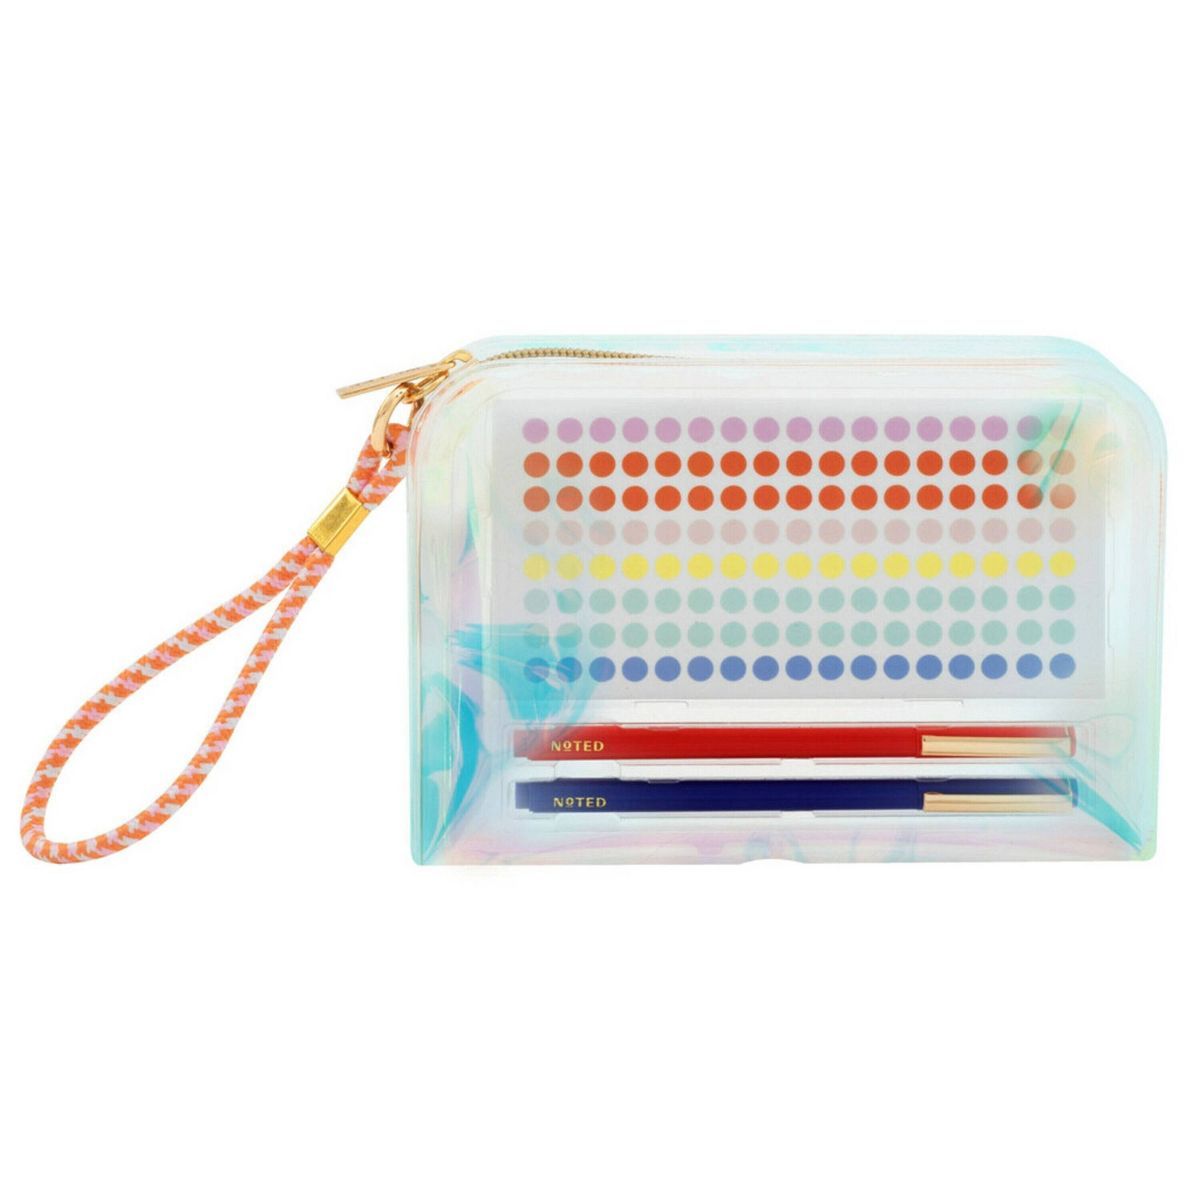 Post-it Noted Hybrid Pencil Pouch Kit | Target